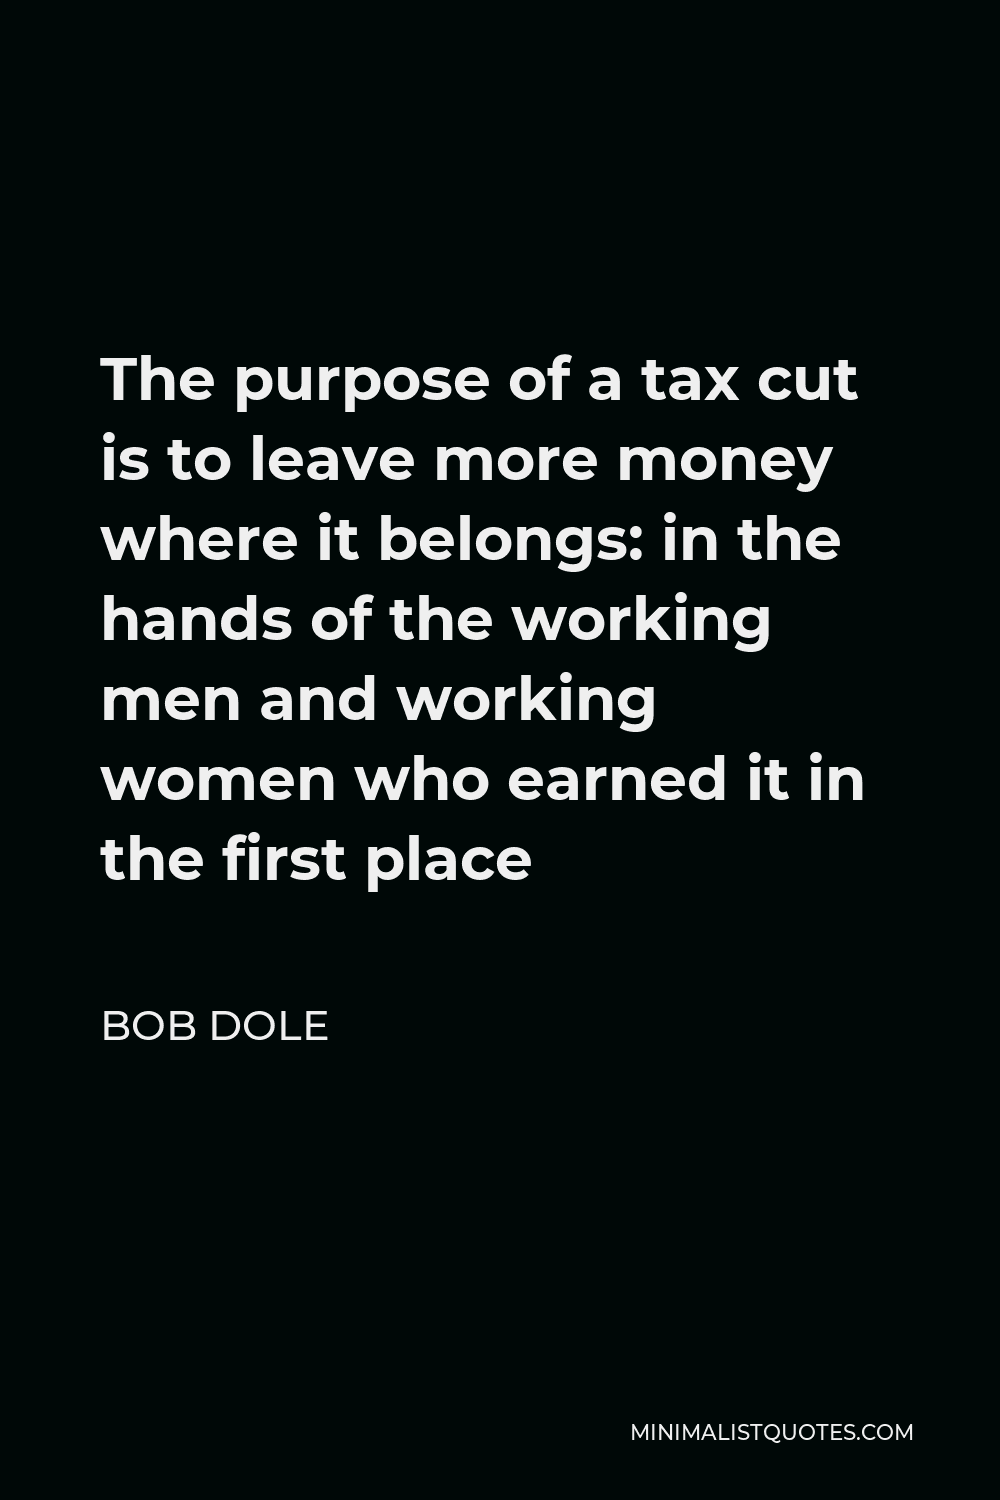 Bob Dole Quote - The purpose of a tax cut is to leave more money where it belongs: in the hands of the working men and working women who earned it in the first place